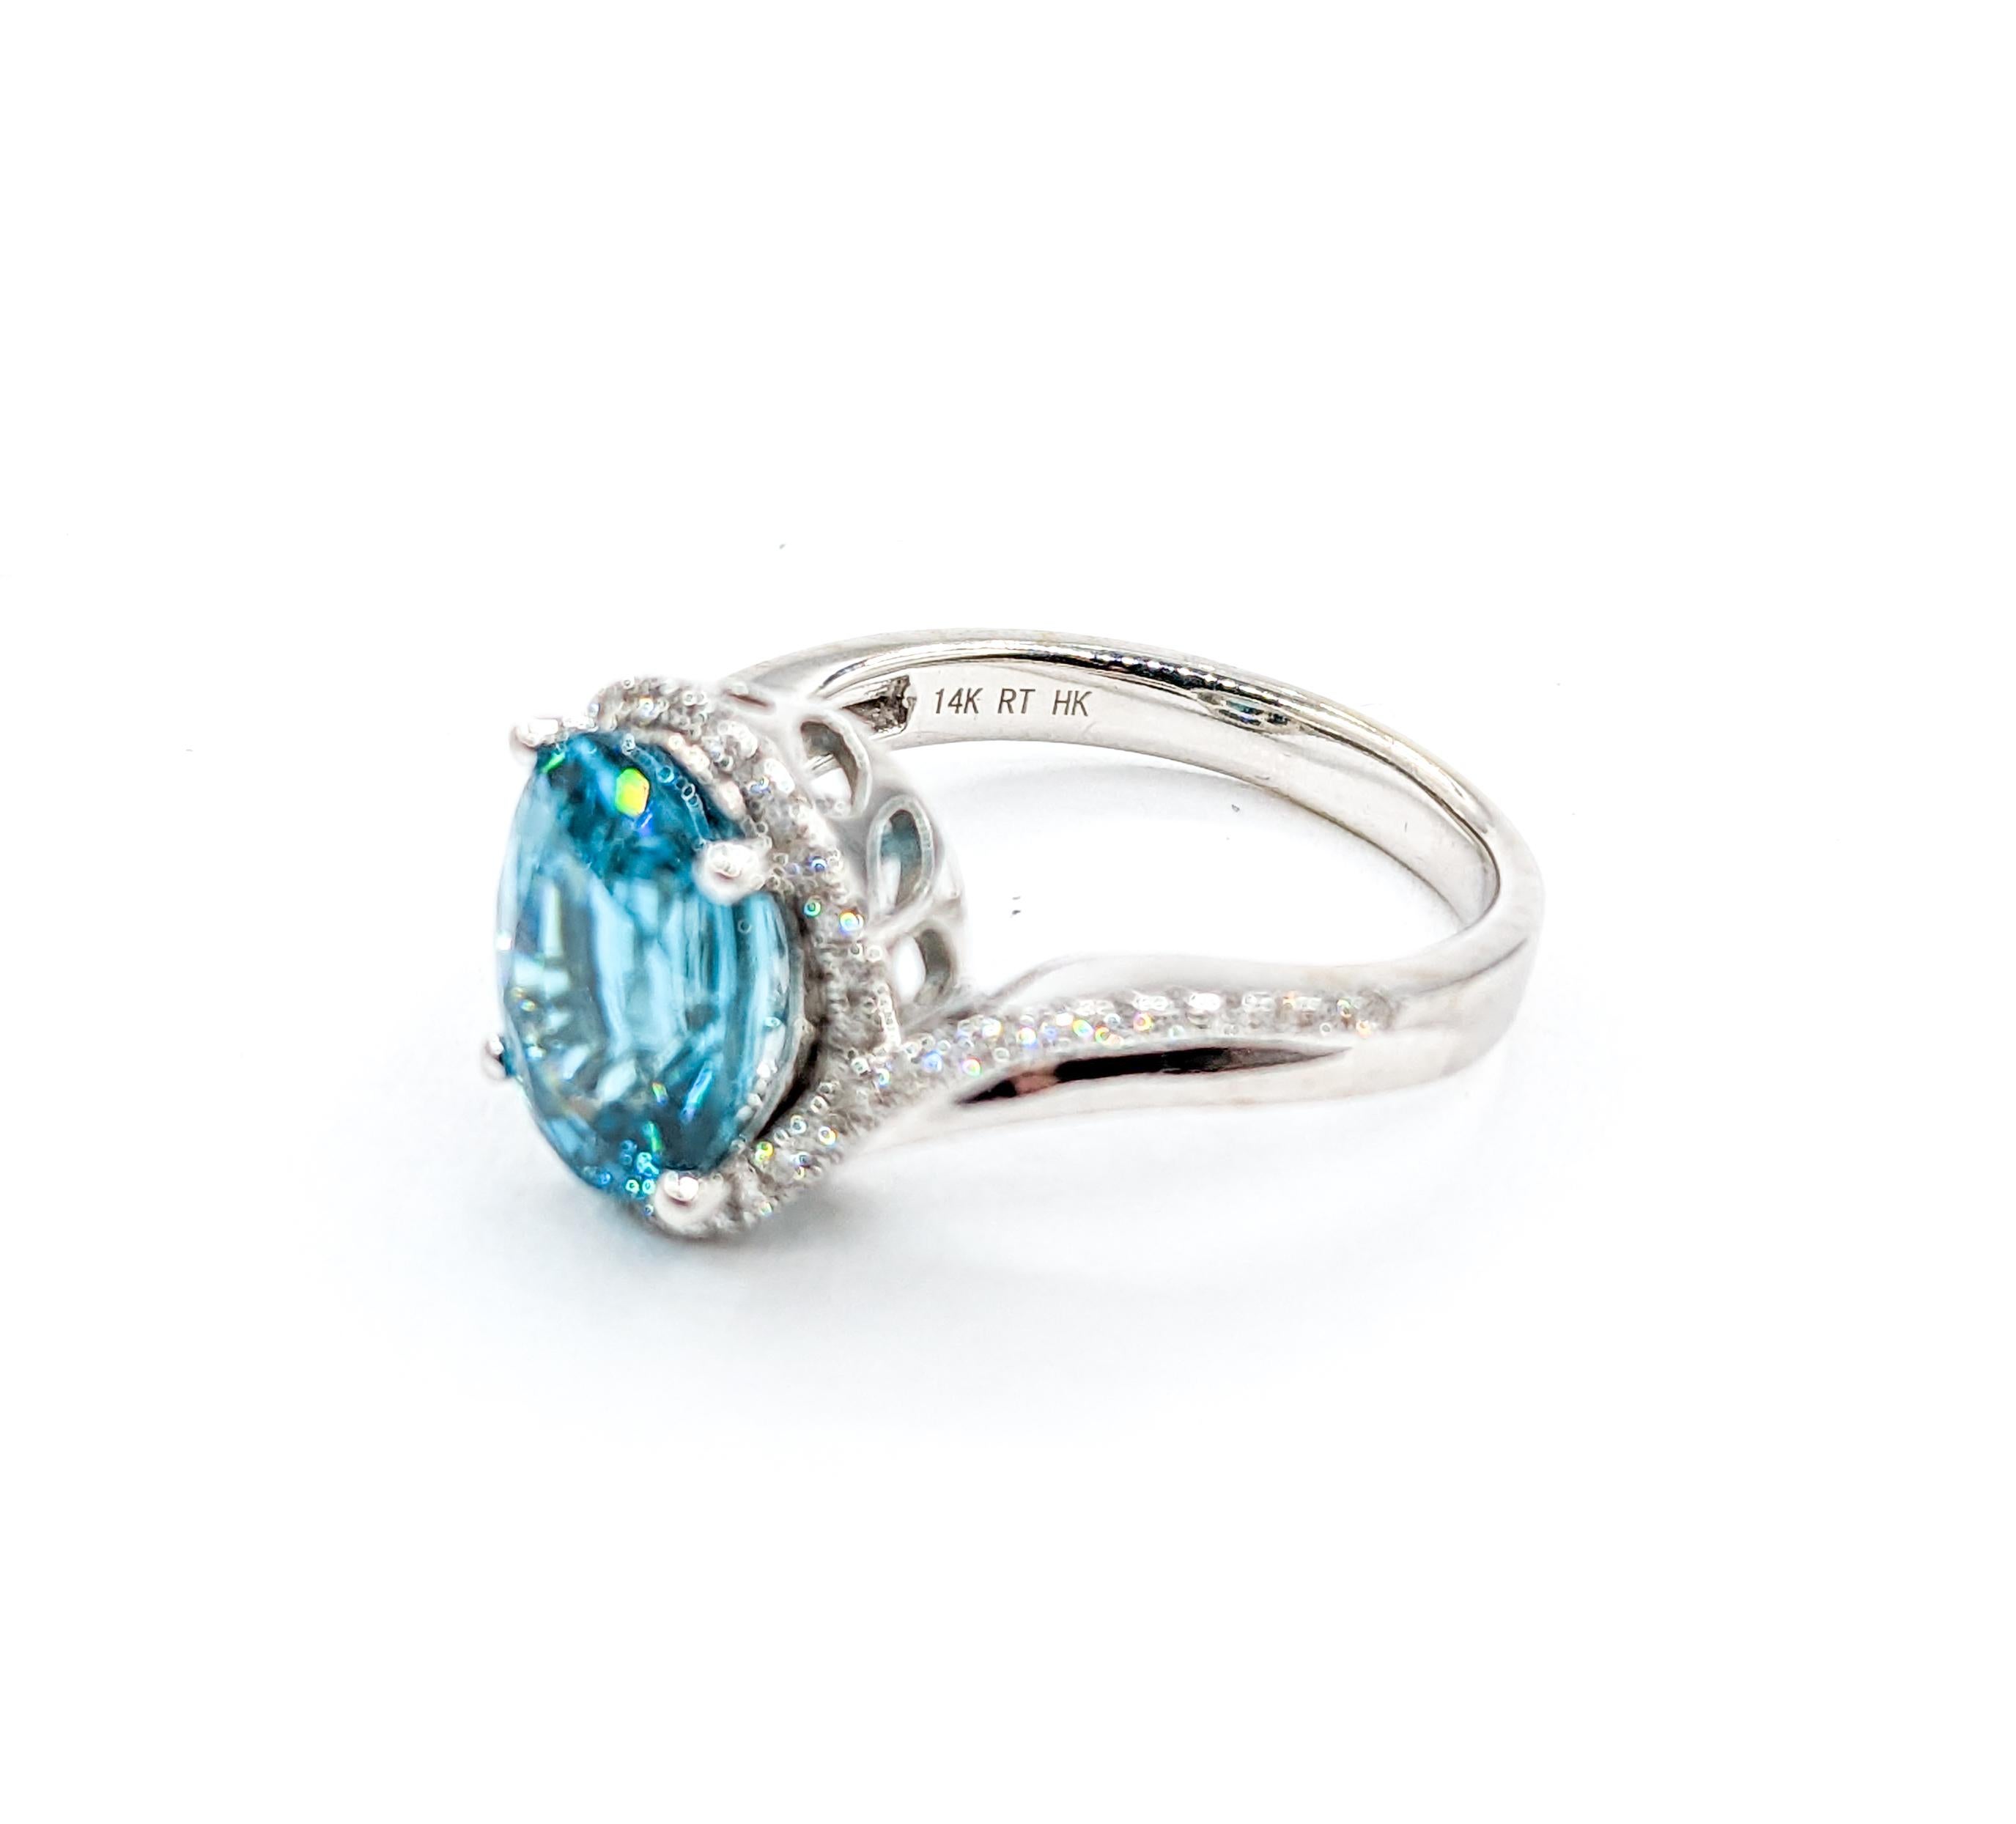 5.0ct Blue Zircon & Diamond Ring In White Gold For Sale 4